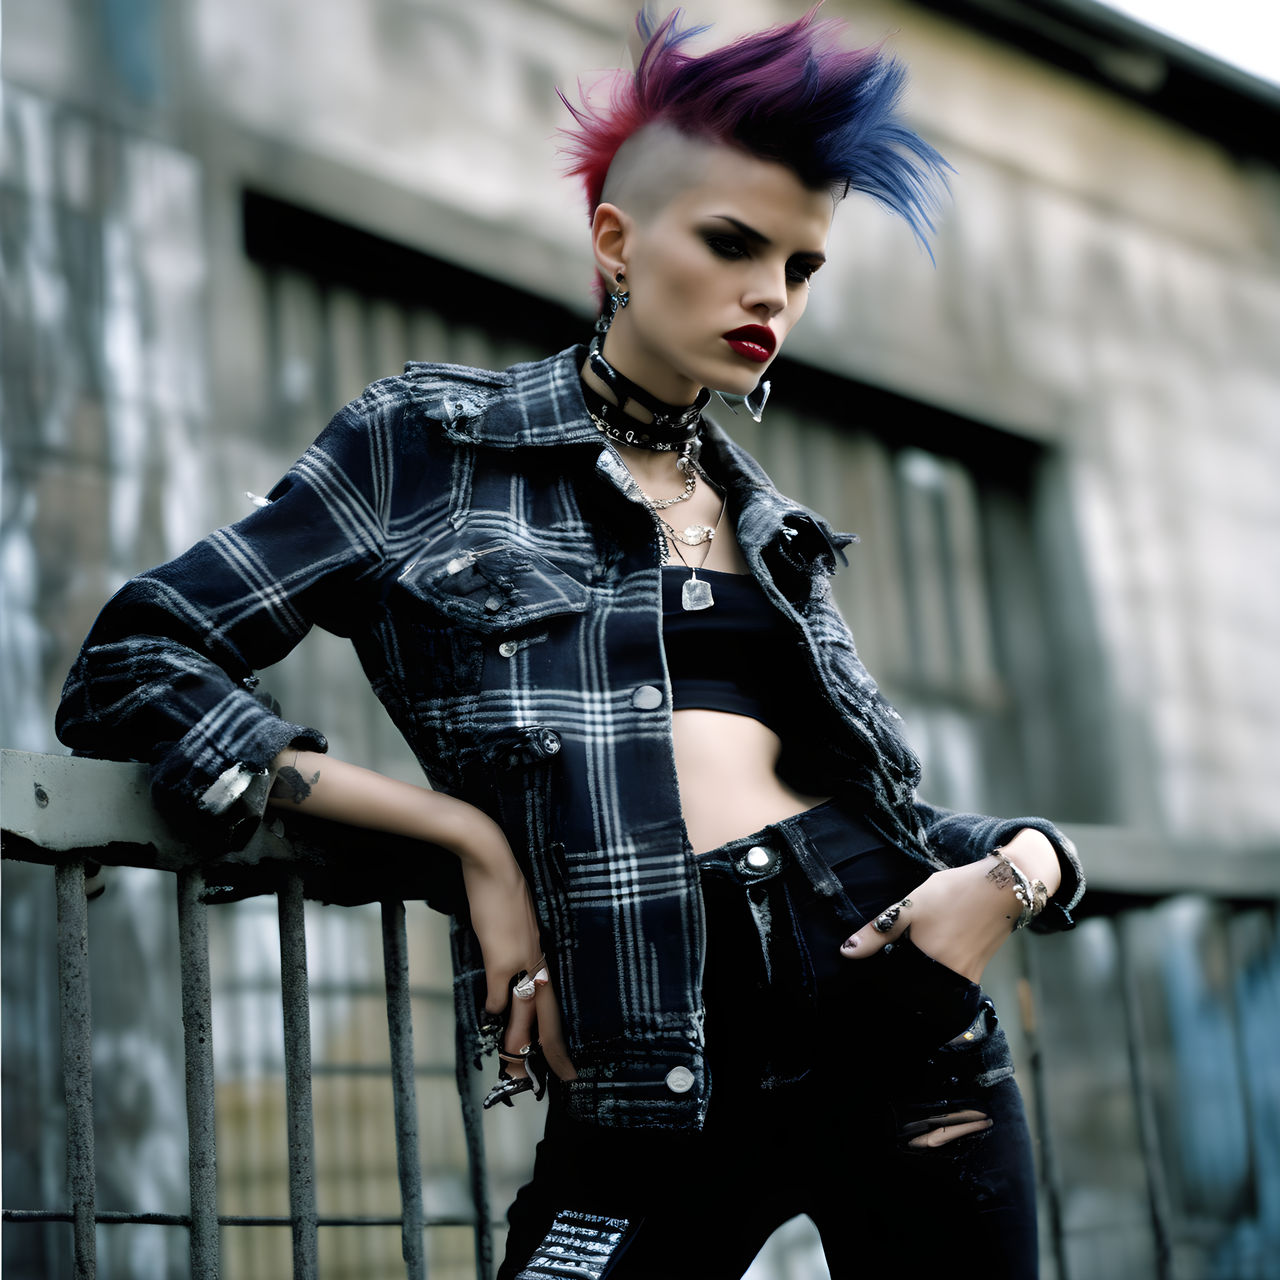 “Leather and Spikes: Iconic Elements of Classic Punk Style”